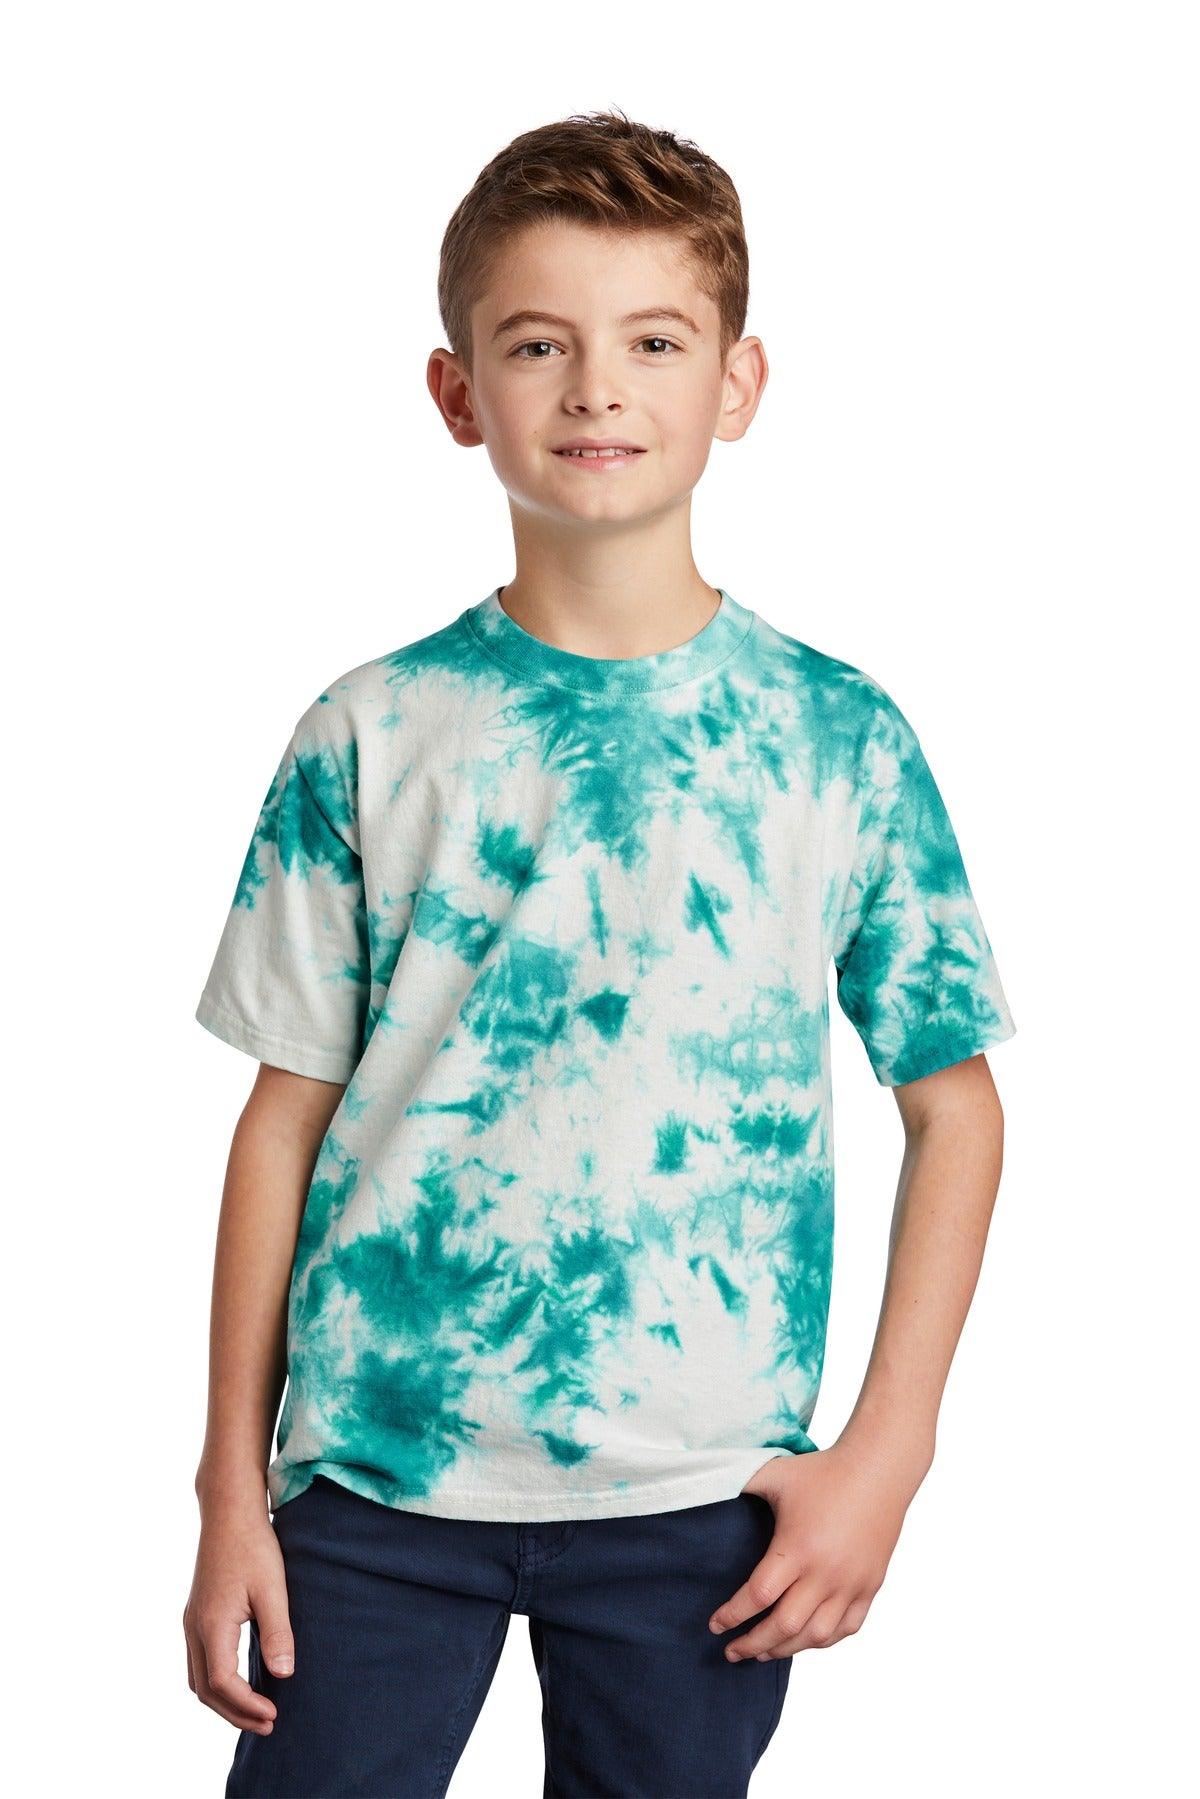 Port & Company Youth Crystal Tie-Dye Tee PC145Y - Dresses Max